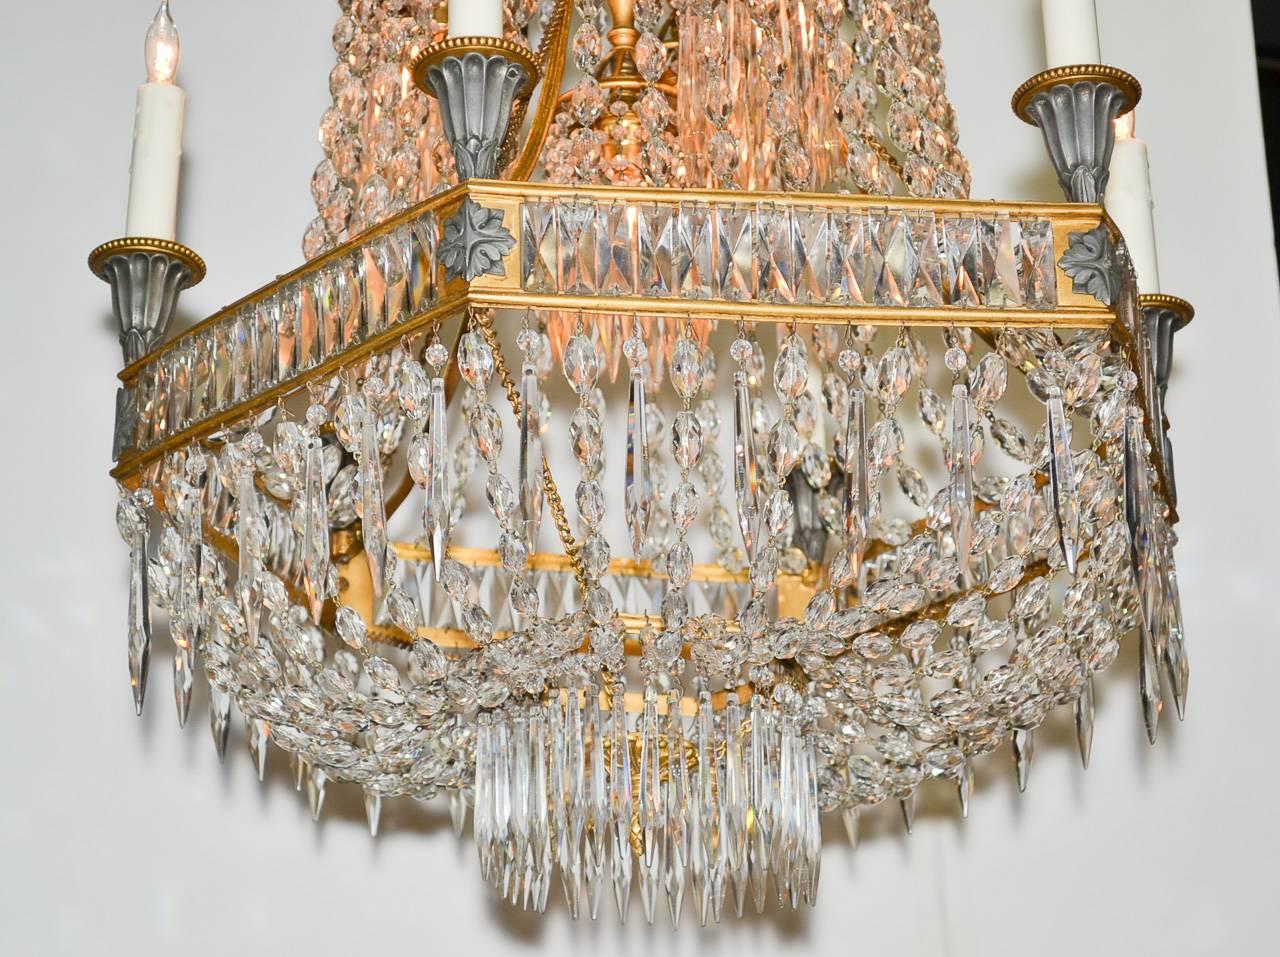 Elegant 19th century French Neoclassical gilt bronze and crystal nine-light chandelier. In basket form; having a clean hexagonal bronze frame punctuated with six candle cups and three interior downward facing lights each ringed with crystal drop